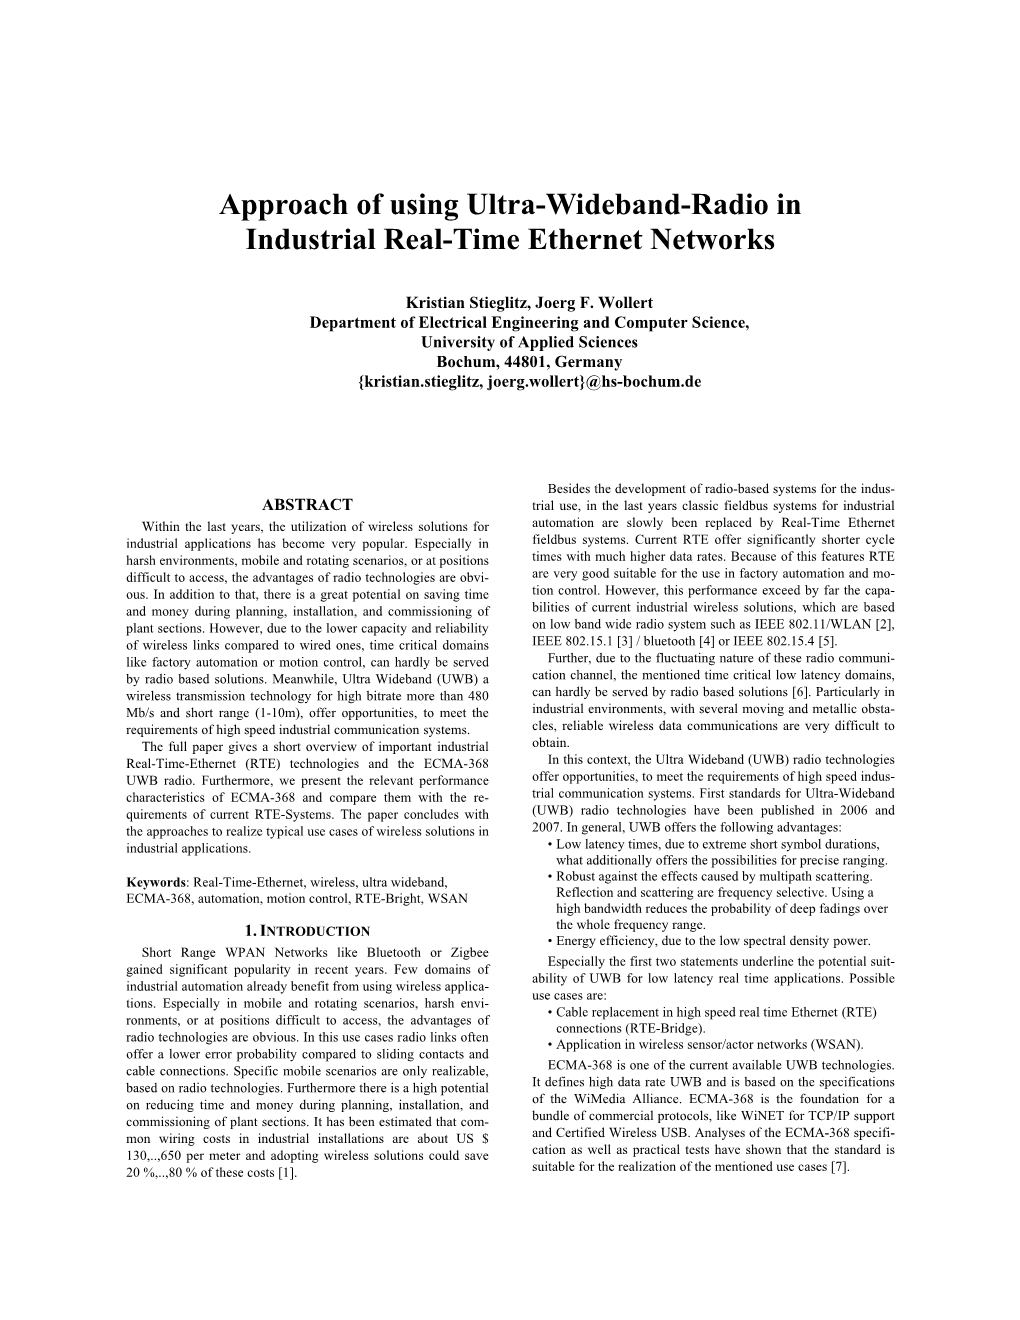 Approach of Using Ultra-Wideband-Radio in Industrial Real-Time Ethernet Networks